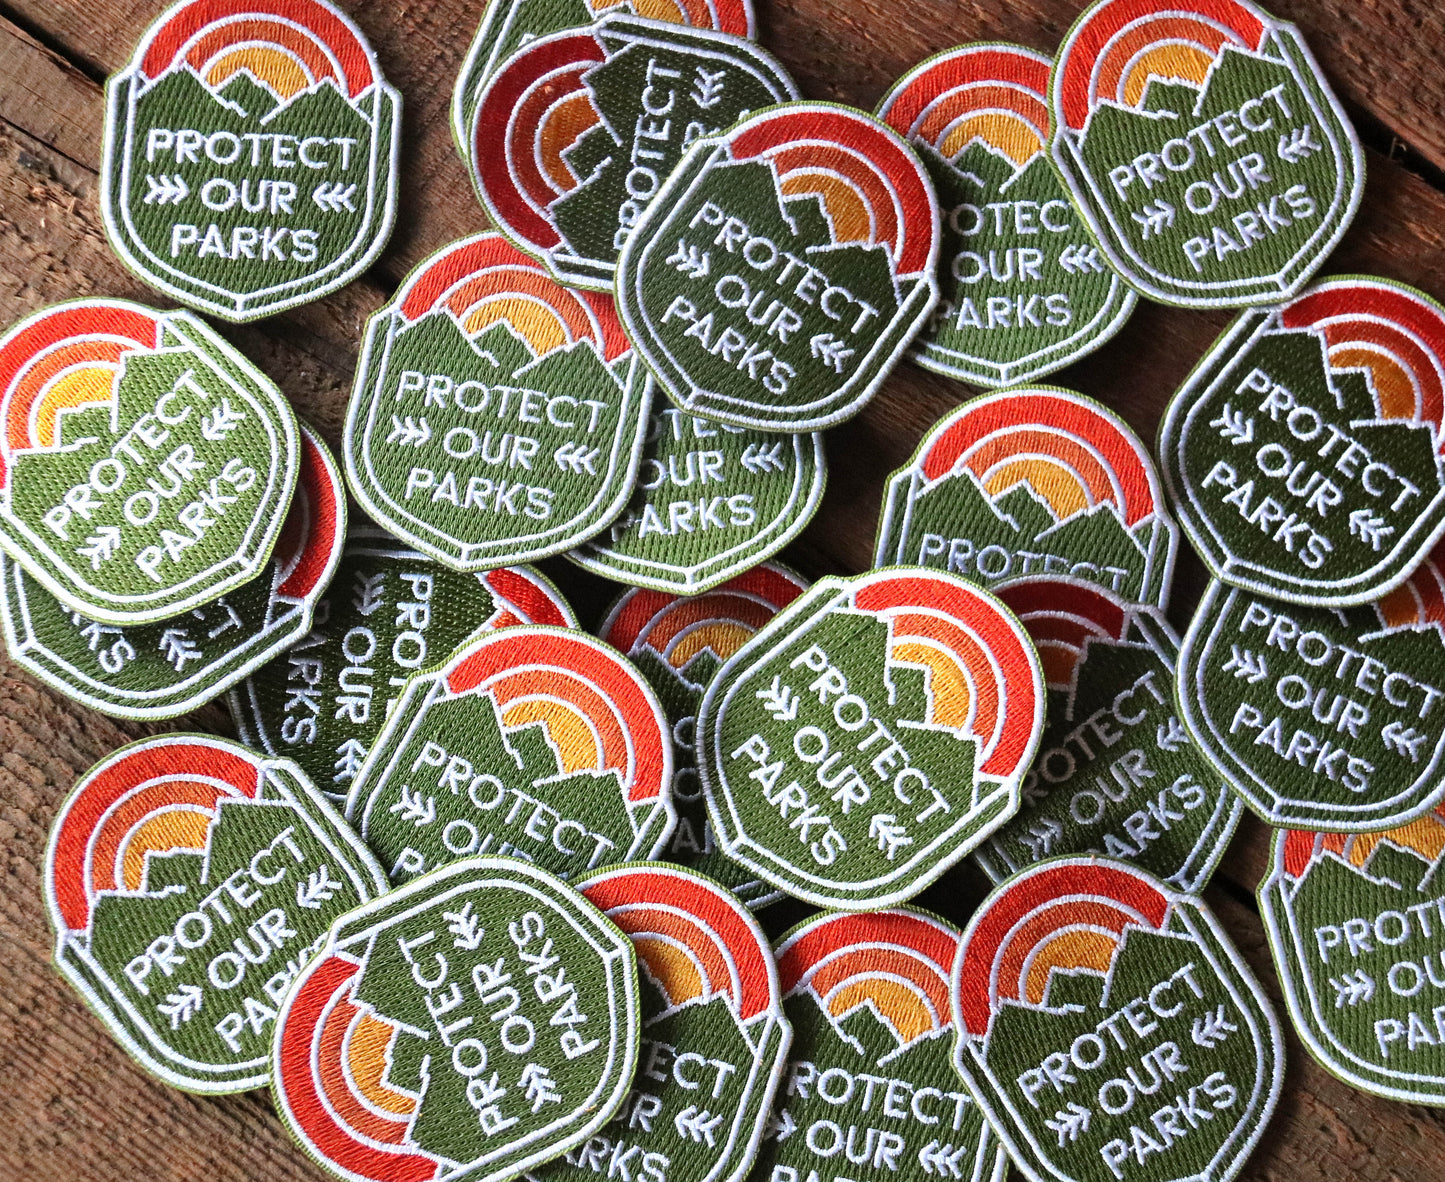 Protect Our Parks Patch